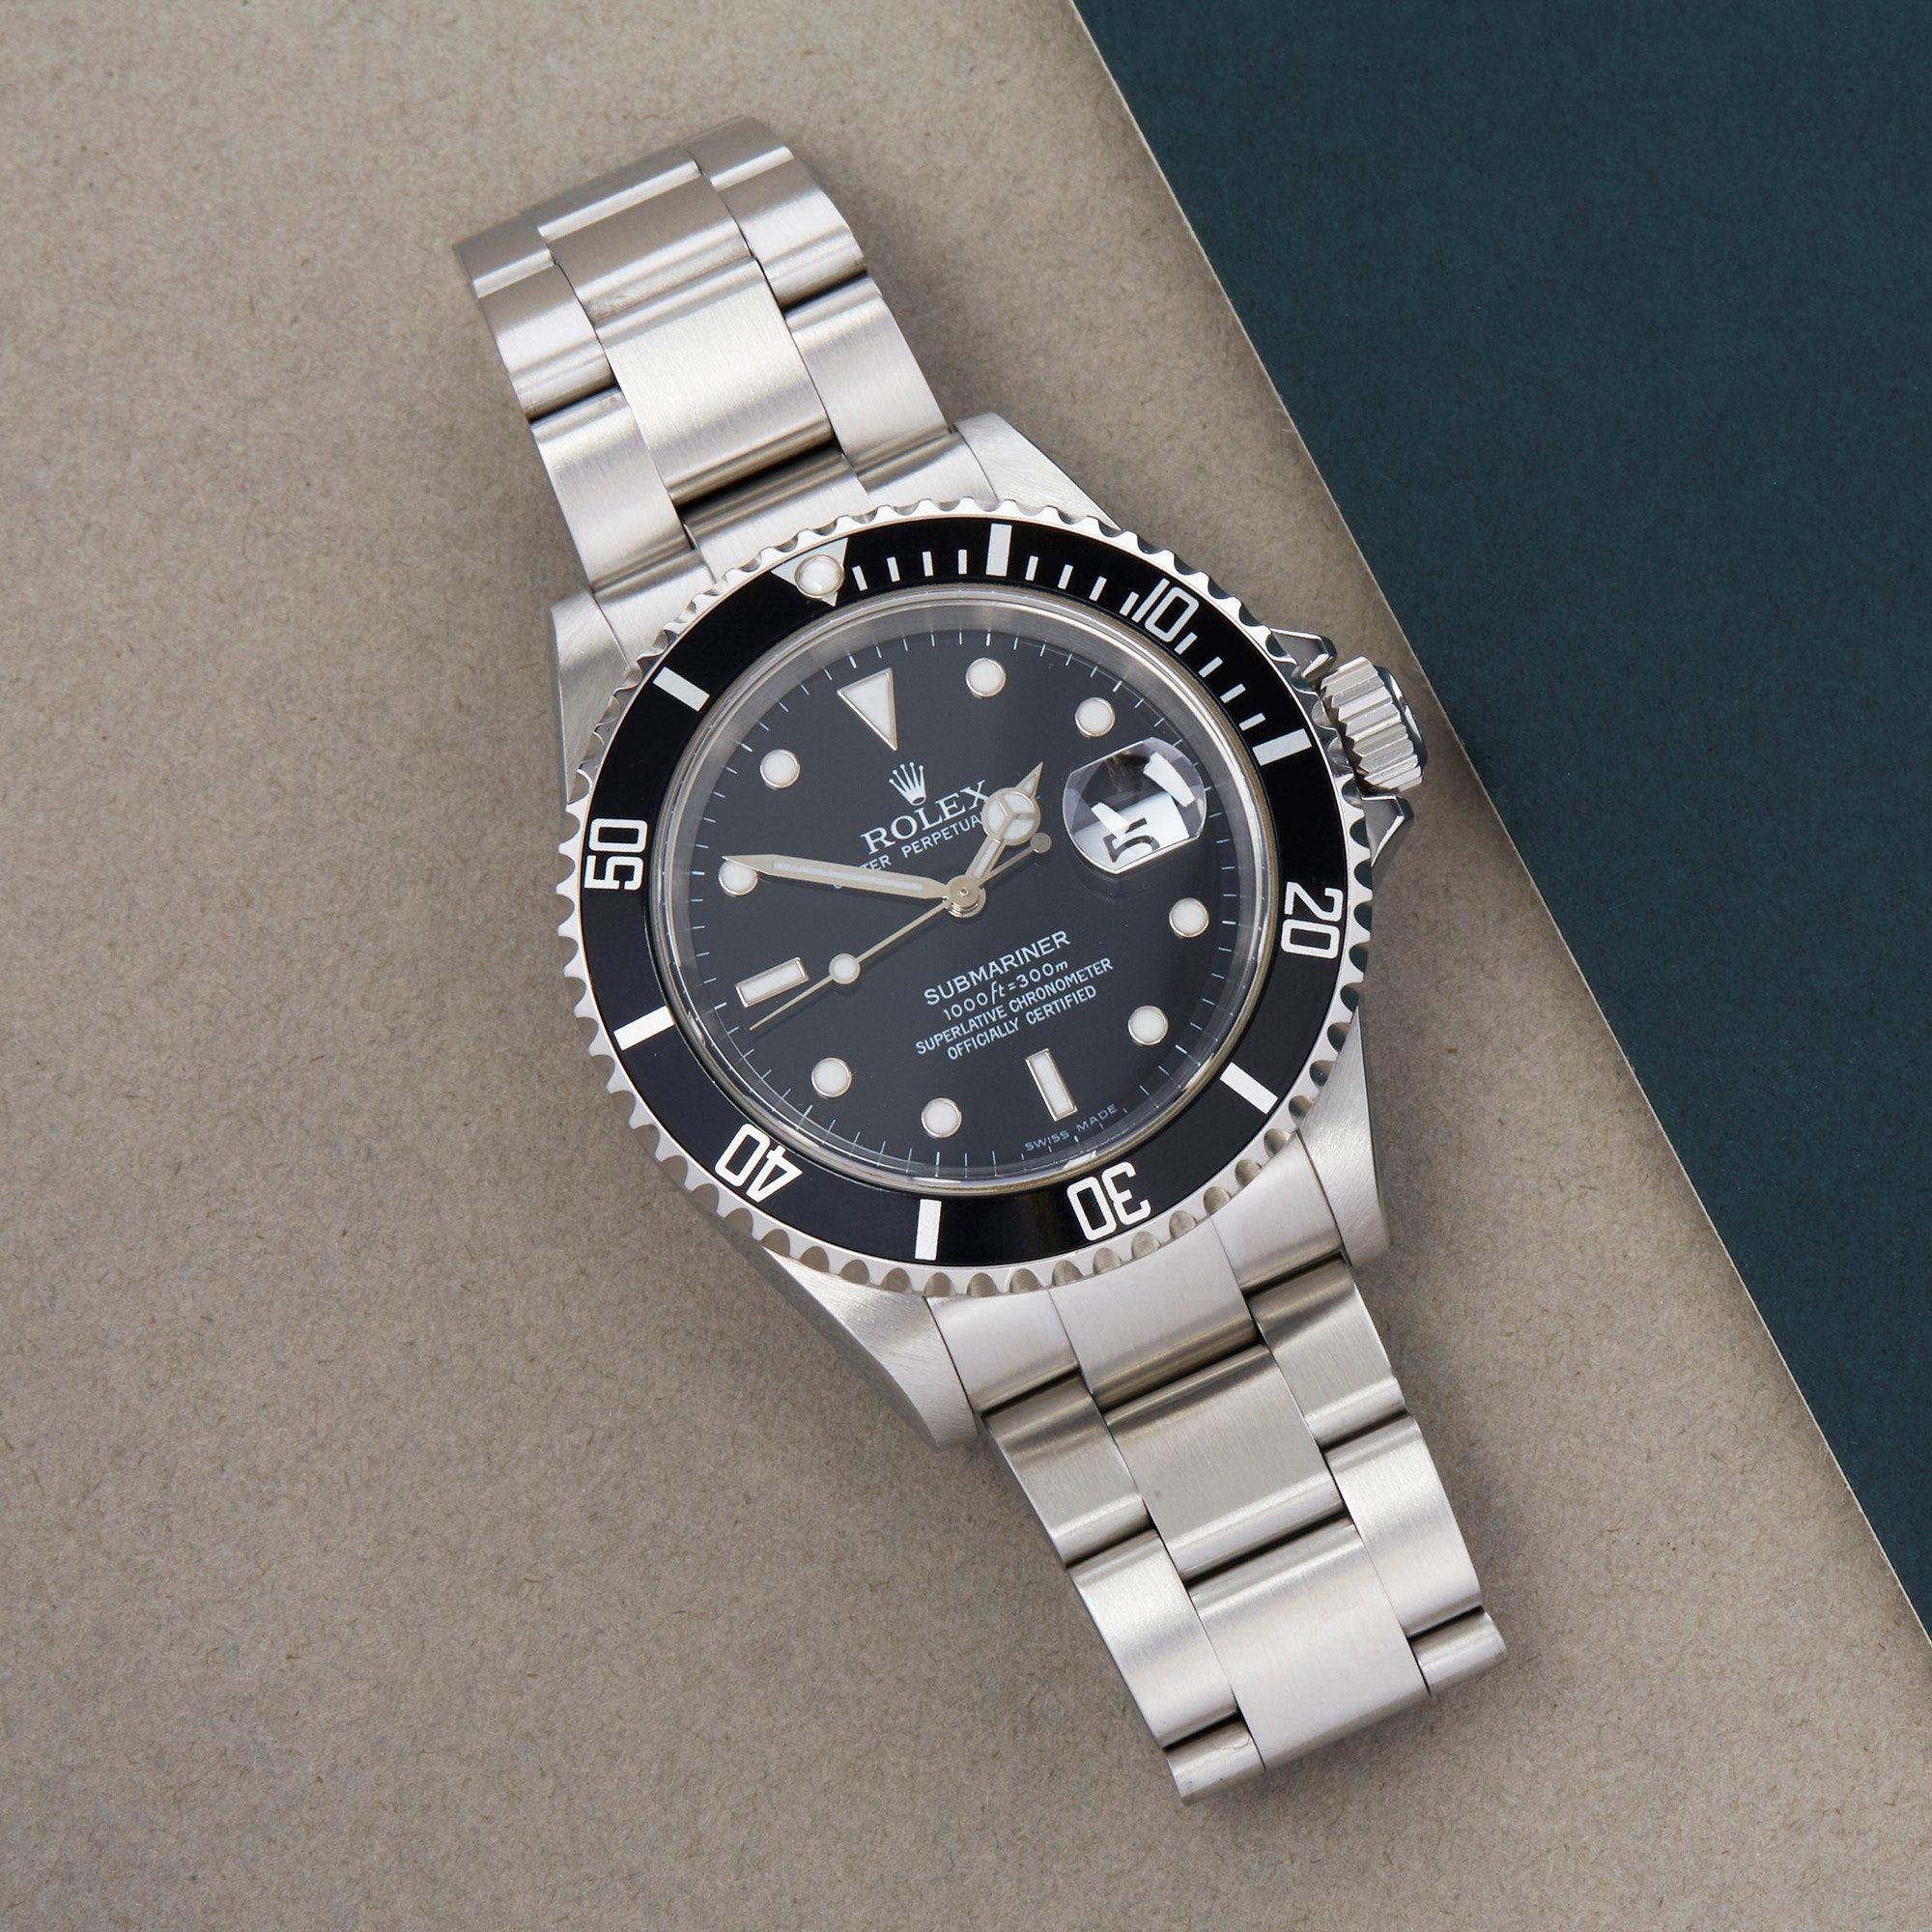 Xupes Reference: W007665
Manufacturer: Rolex
Model: Submariner
Model Variant: Date
Model Number: 16610
Age: 23-07-2005
Gender: Men
Complete With: Rolex Box, Manuals, Guarantee, Calendar Card, Card Holder & Swing Tag
Dial: Black Baton
Glass: Sapphire